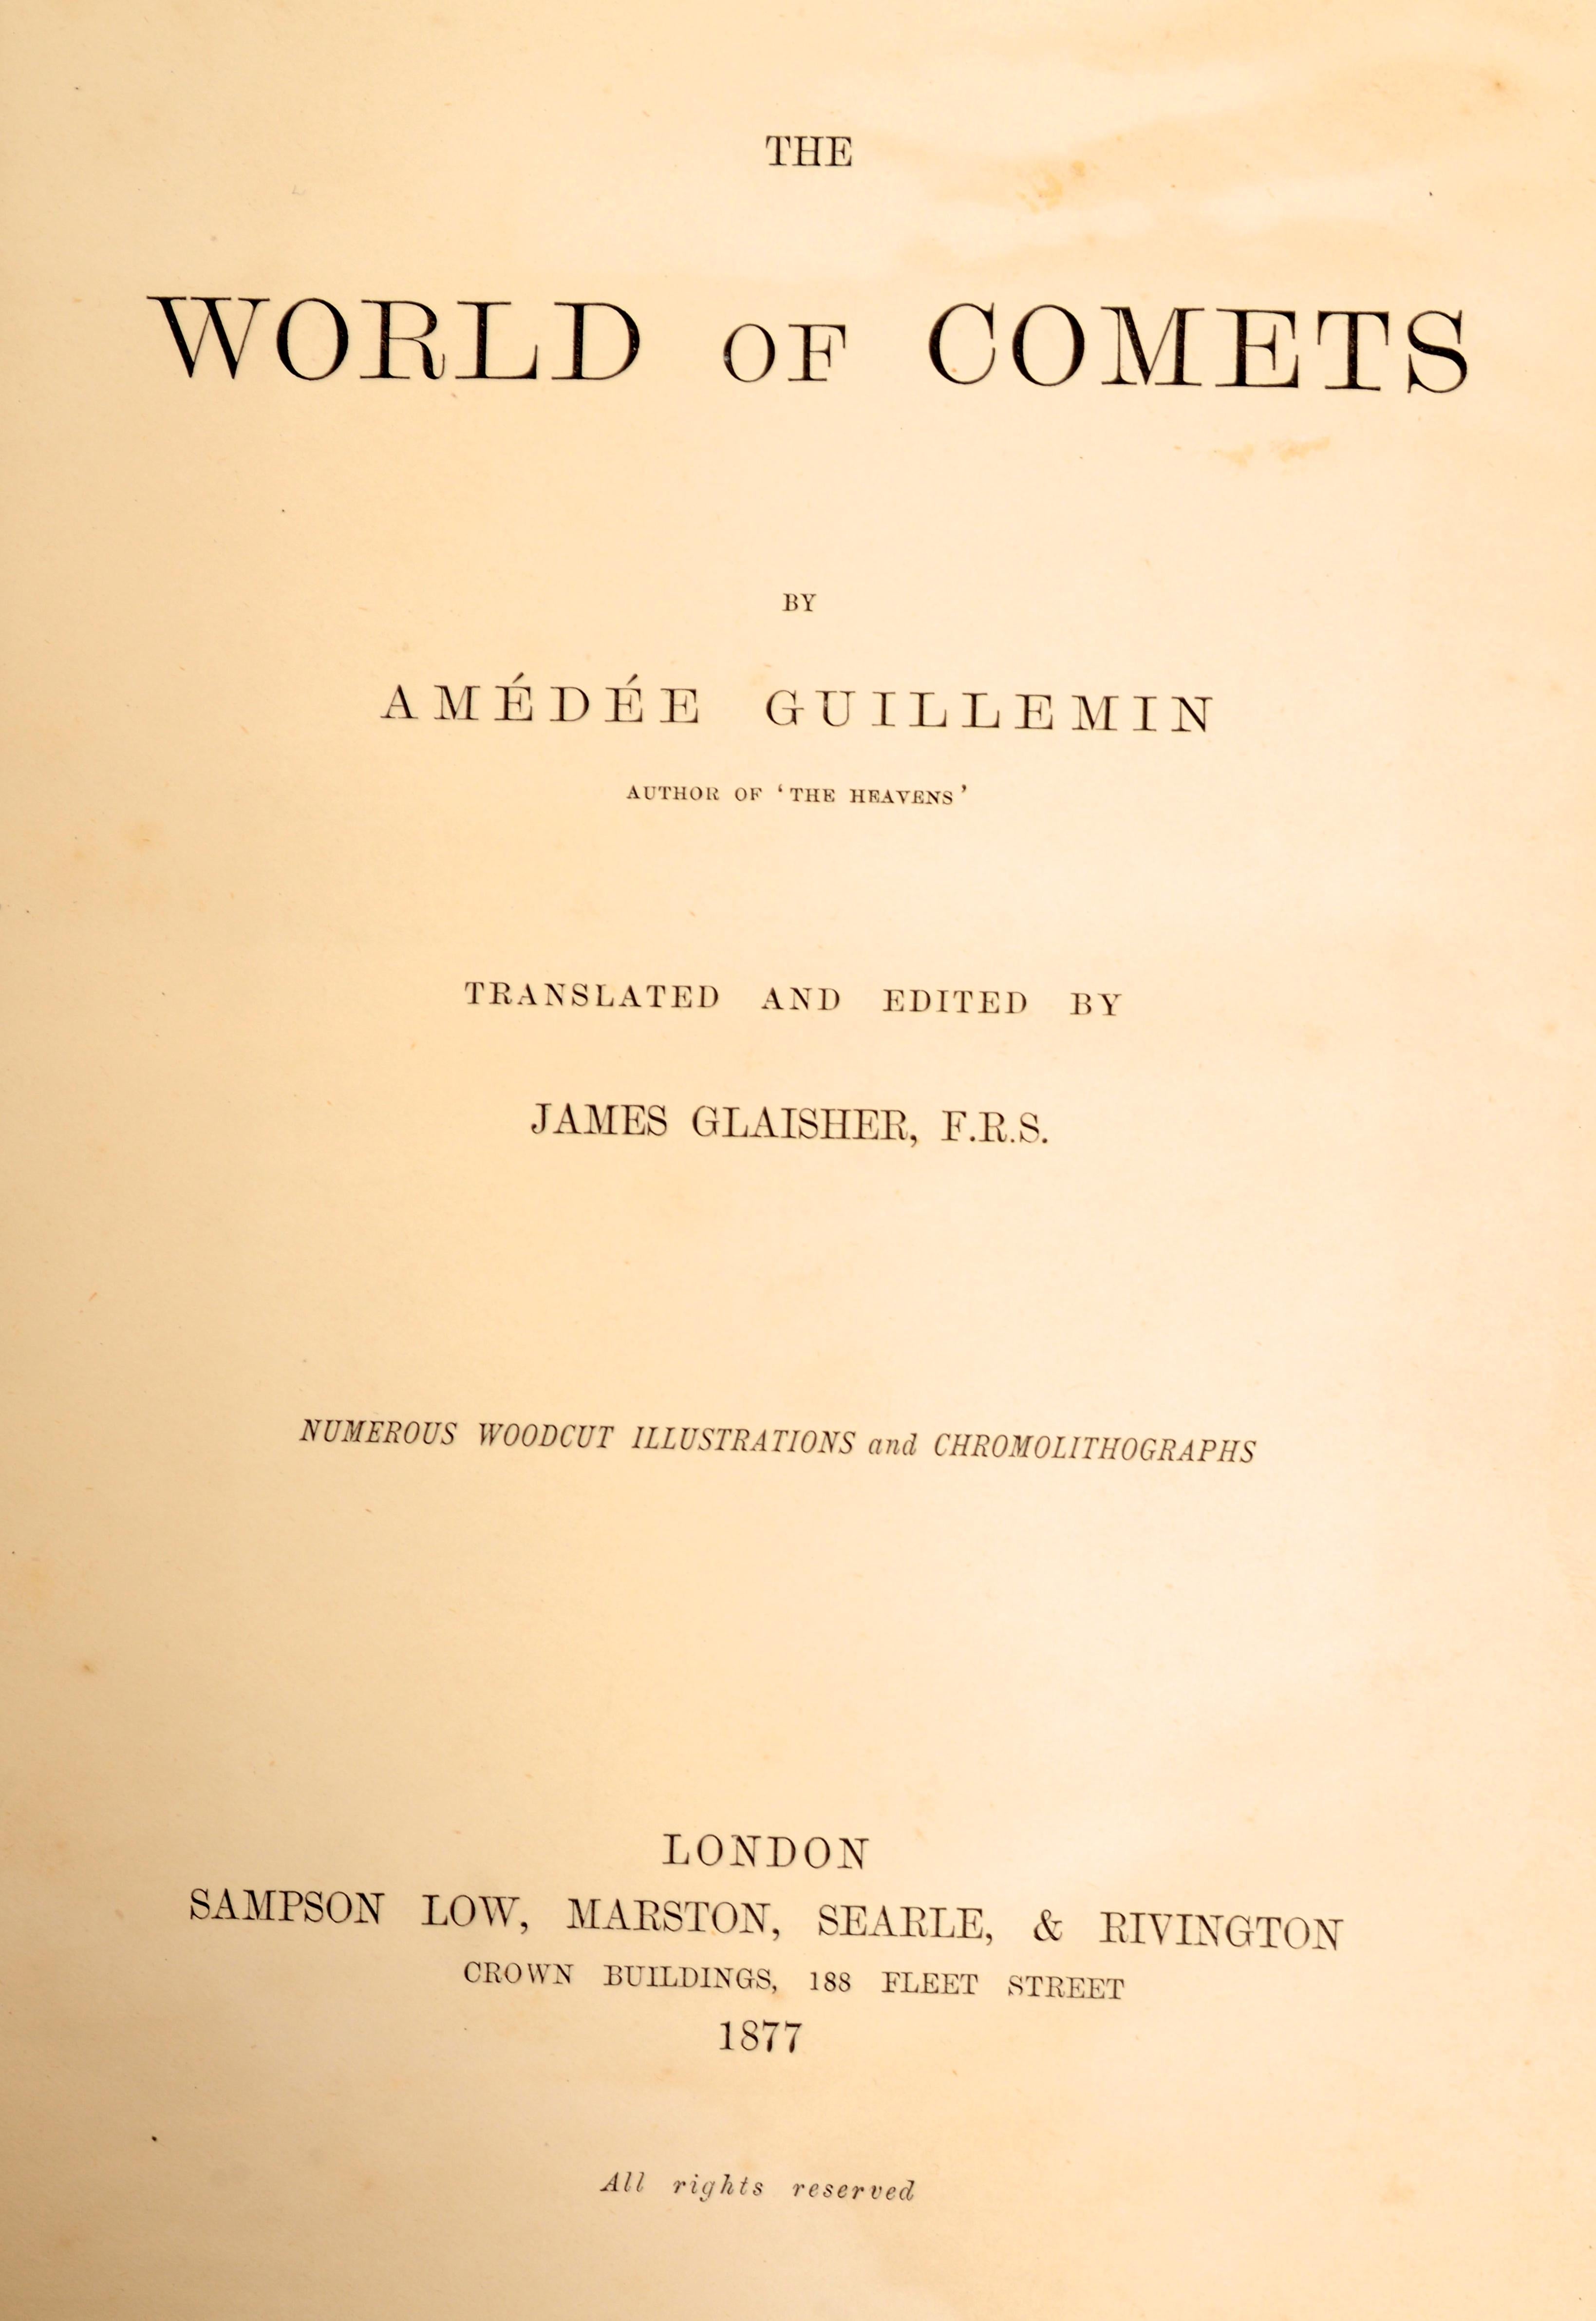 The World of Comets. Translated and Edited by James Glaisher. With Numerous Woodcuts and Chromolithographs, by Amedee Guillemin. 1st Ed Leather Bound hardcover, Published by Sampson Low, Marston, Searle & Rivington, 1877, London. Original